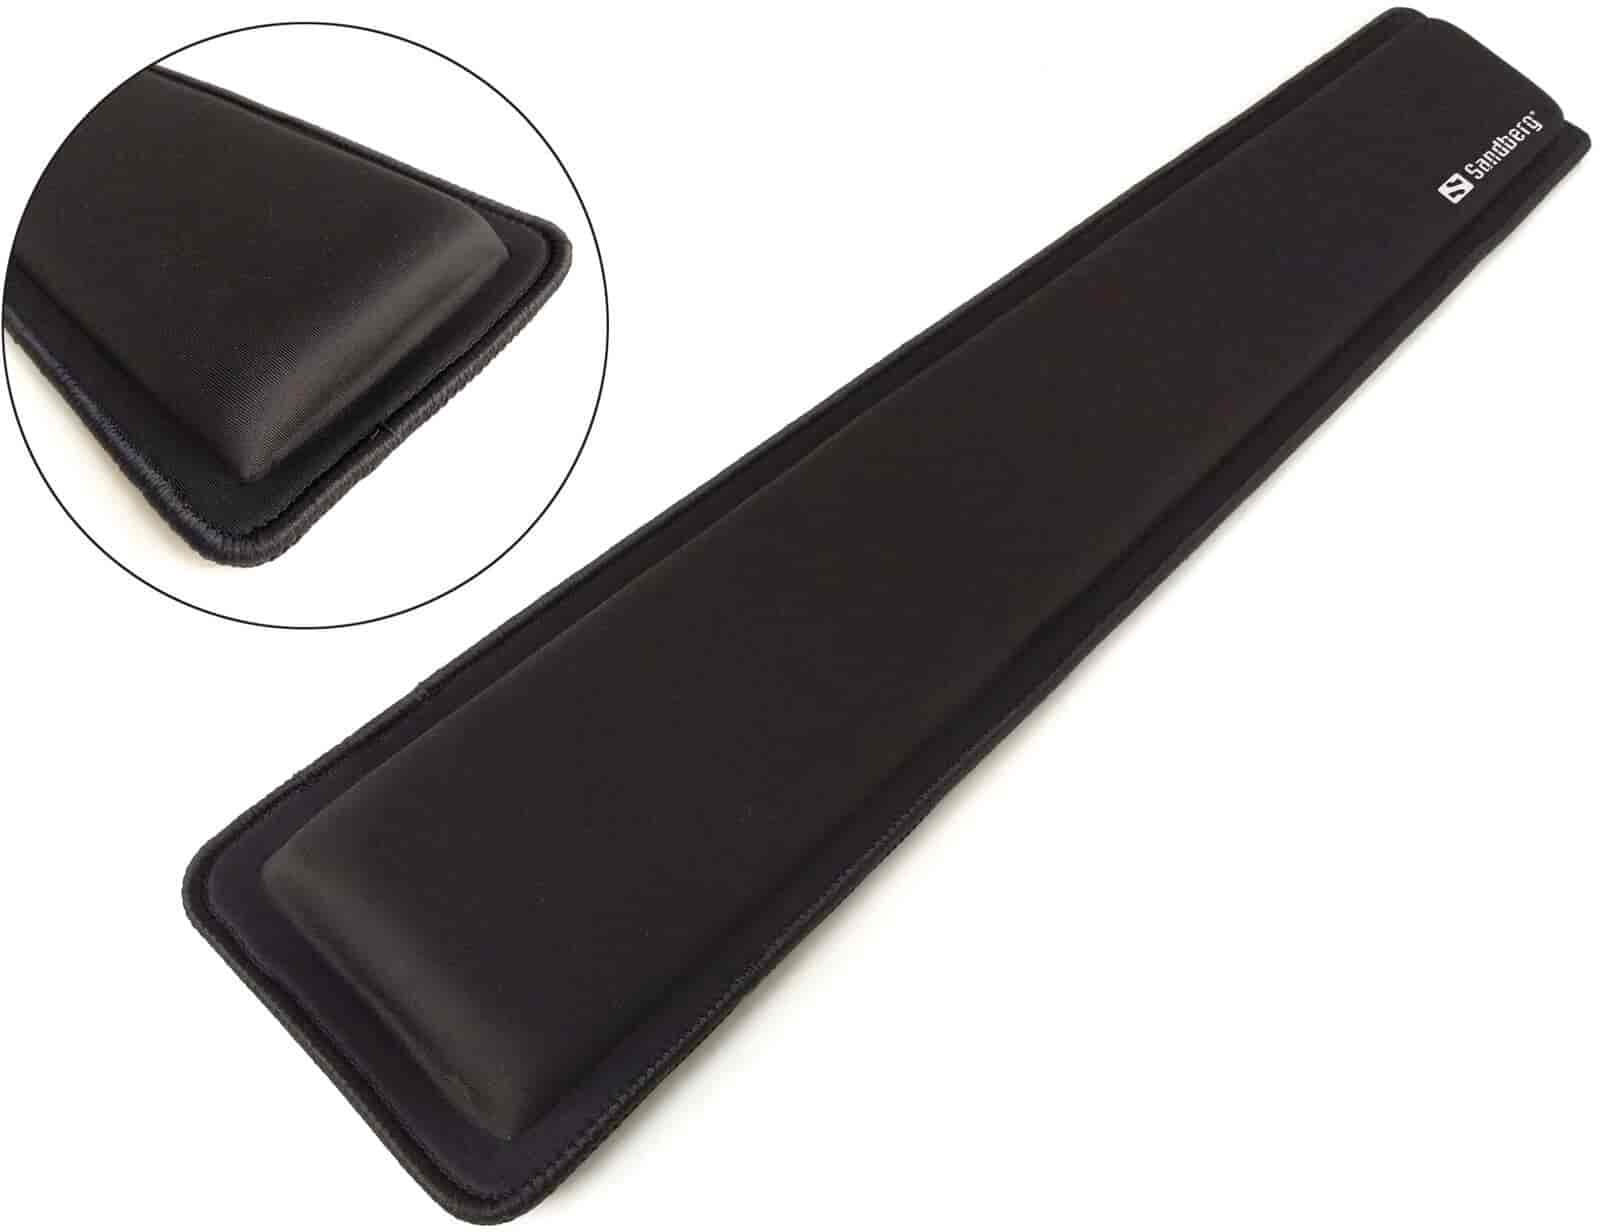 Wrist Rest Pro XXLSandberg Wrist Rest Pro XXL makes it comfortable to work for long periods with keyboard and mouse. Stays in place thanks to the non-slip underside, even when you make rapid mouse movements or keystrokes. Stitched edges to avoid fraying.Sandberg